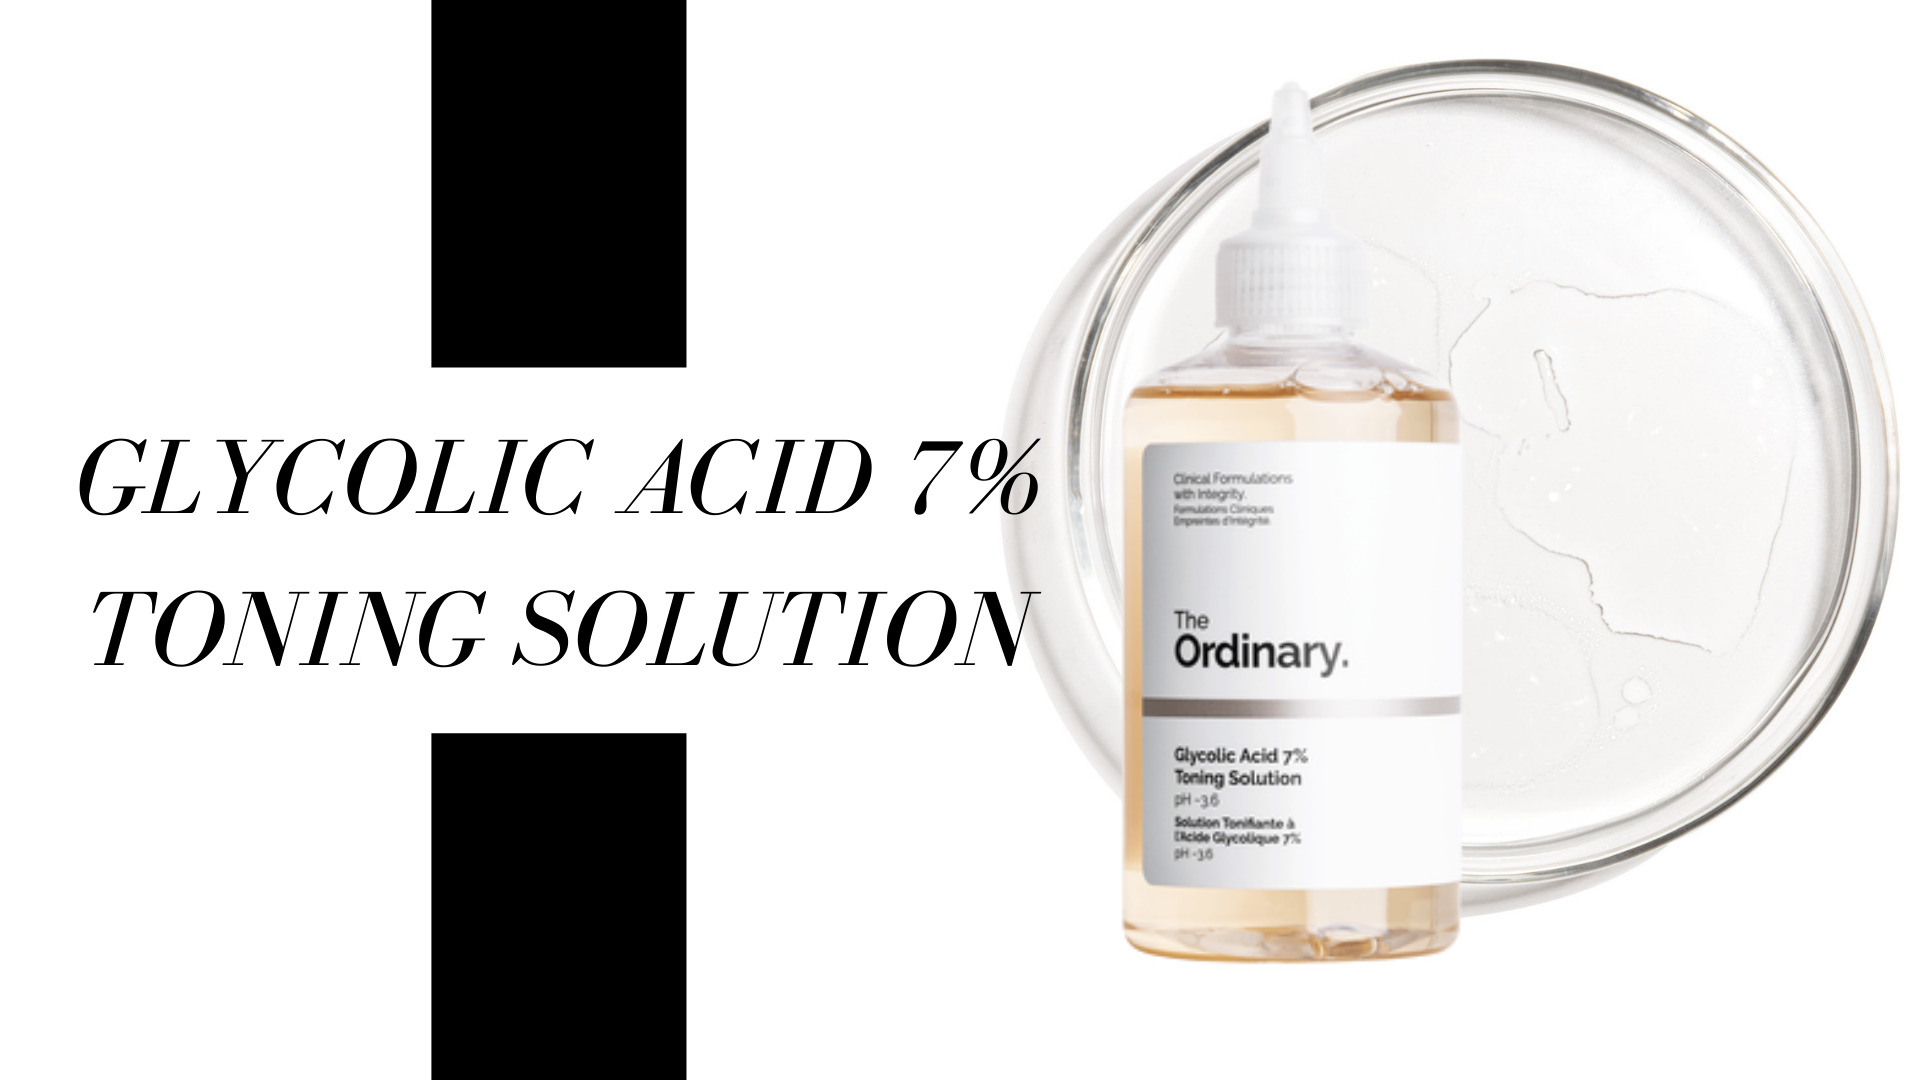 This tonic has 7% glycolic acid, amino acids, aloe vera, ginseng, and Tasmanian pepper berry. Glycolic Acid is known because it is an alpha hydroxy acid that exfoliates the skin. This 7% toning solution offers mild exfoliation for improved skin radiance and visible clarity.